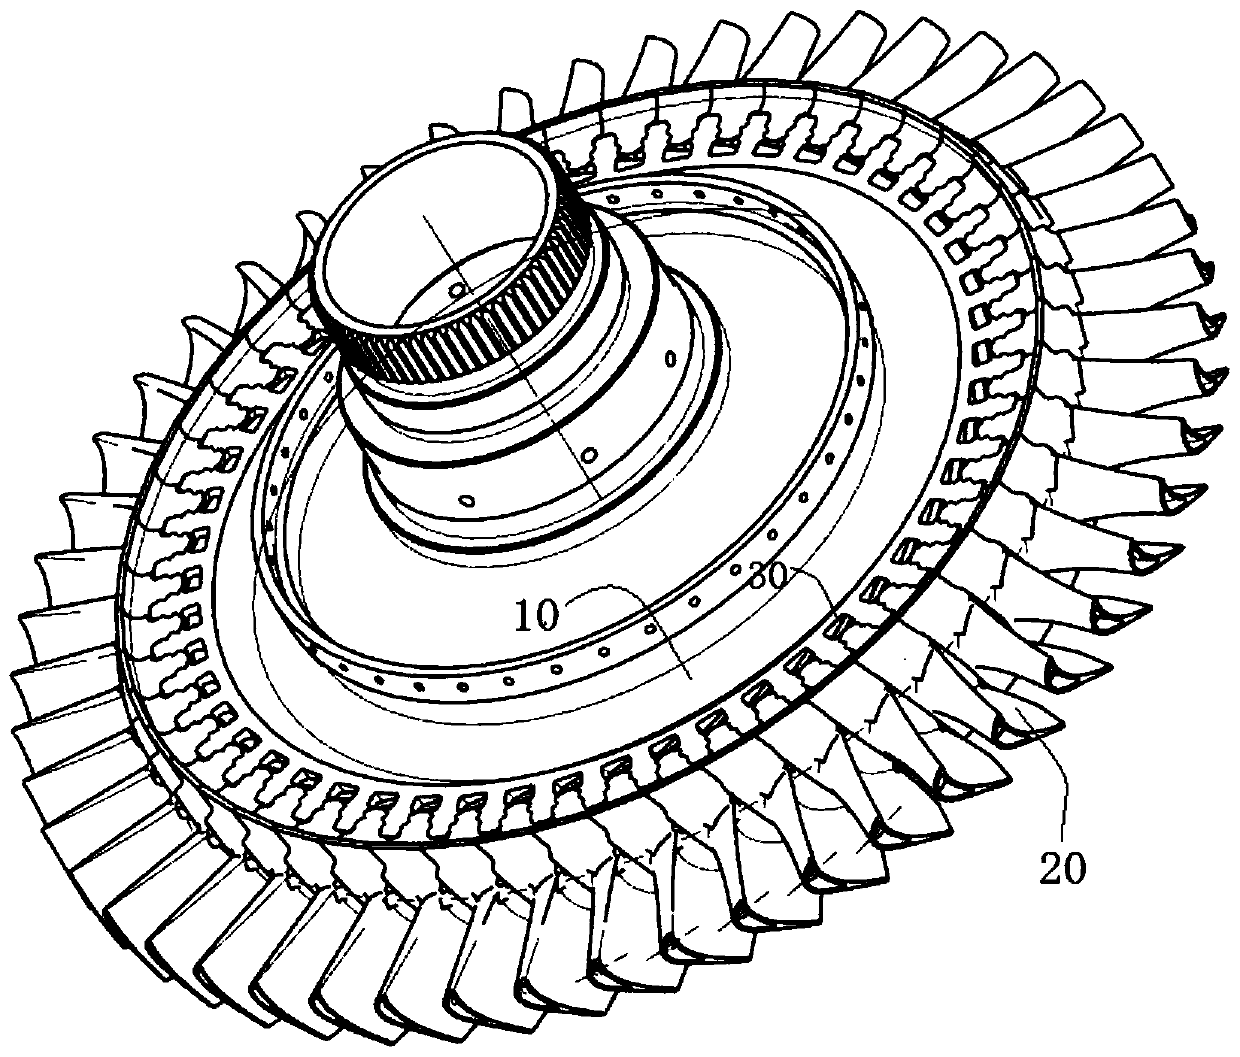 Turbine disc and blade locking mechanism for turboprop engine